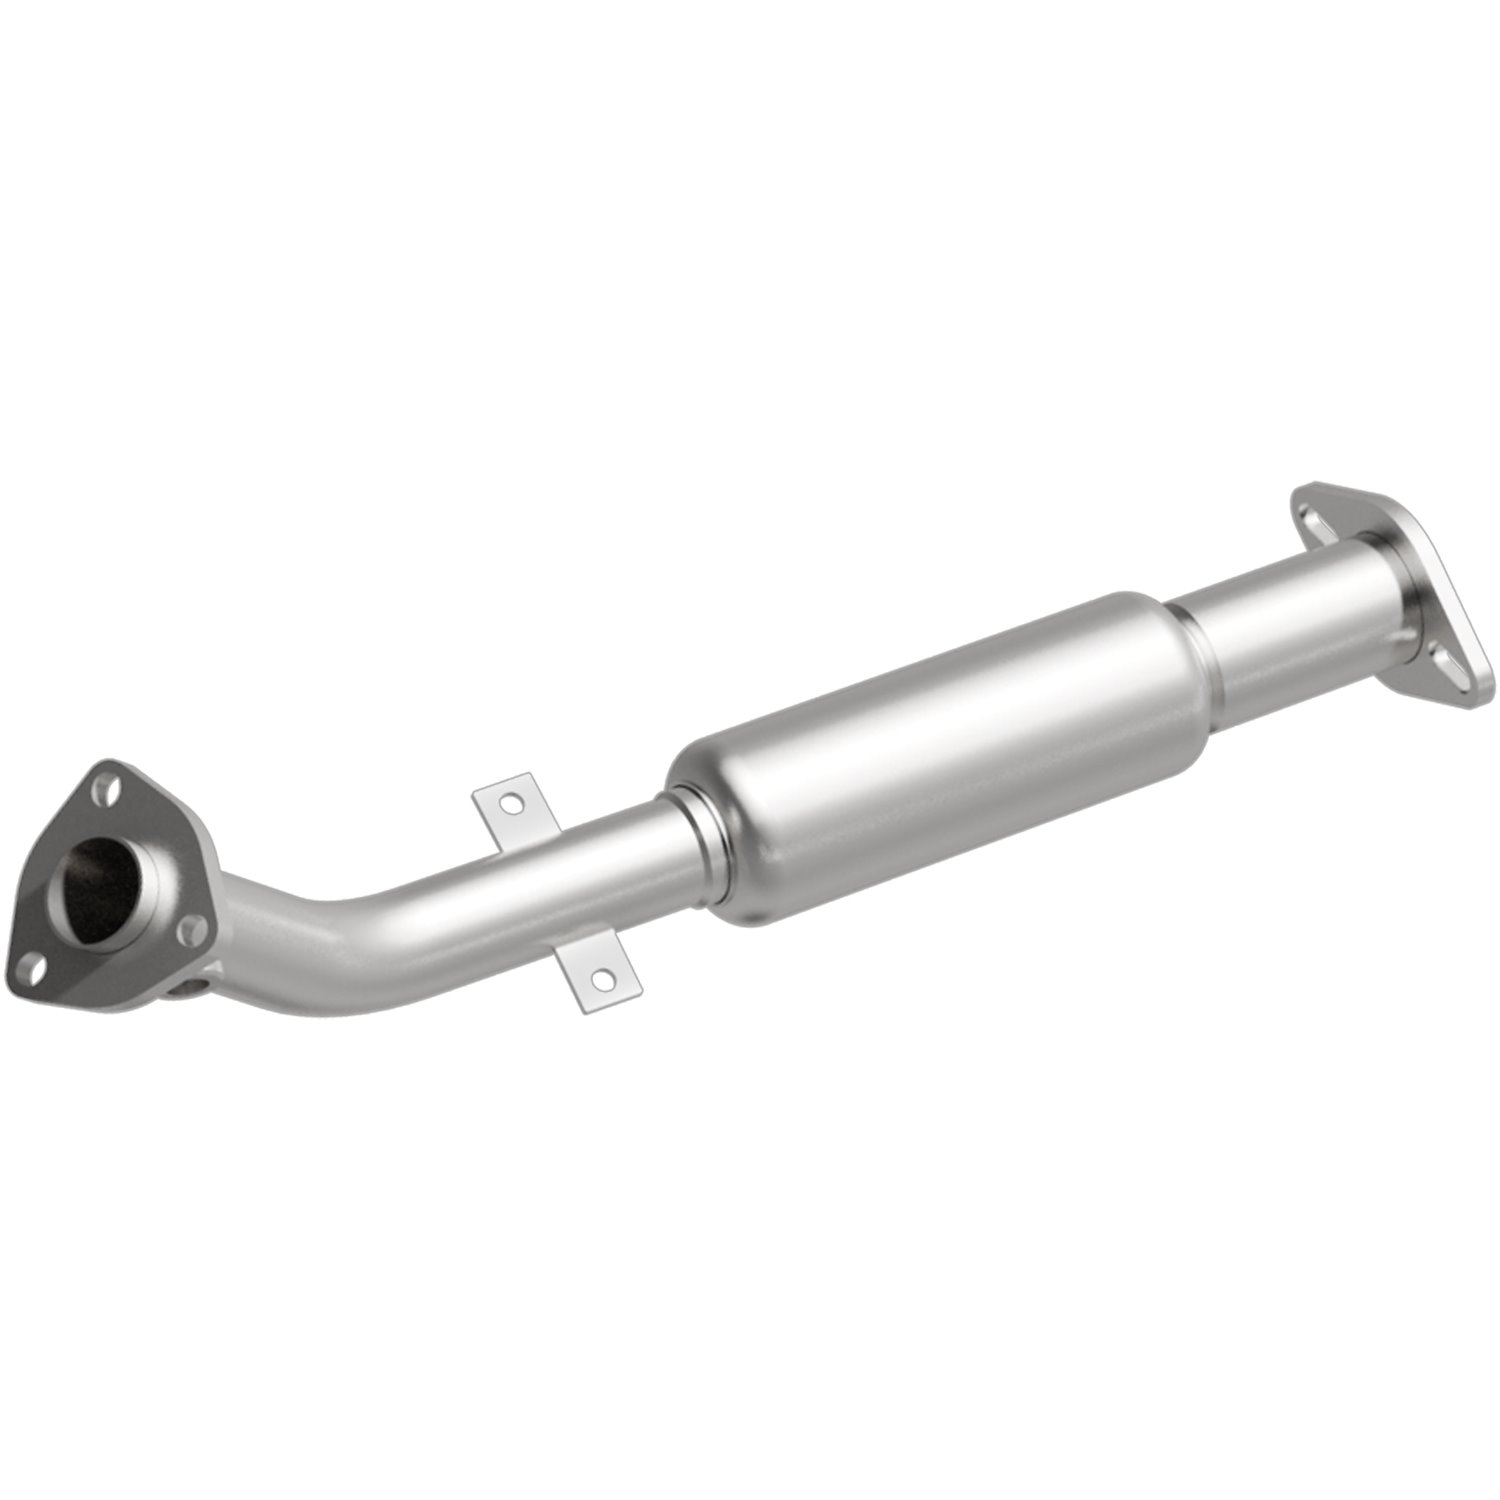 Direct-Fit Exhaust Resonator and Pipe Assembly, 1998-2004 Nissan Pathfinder, Infiniti QX4